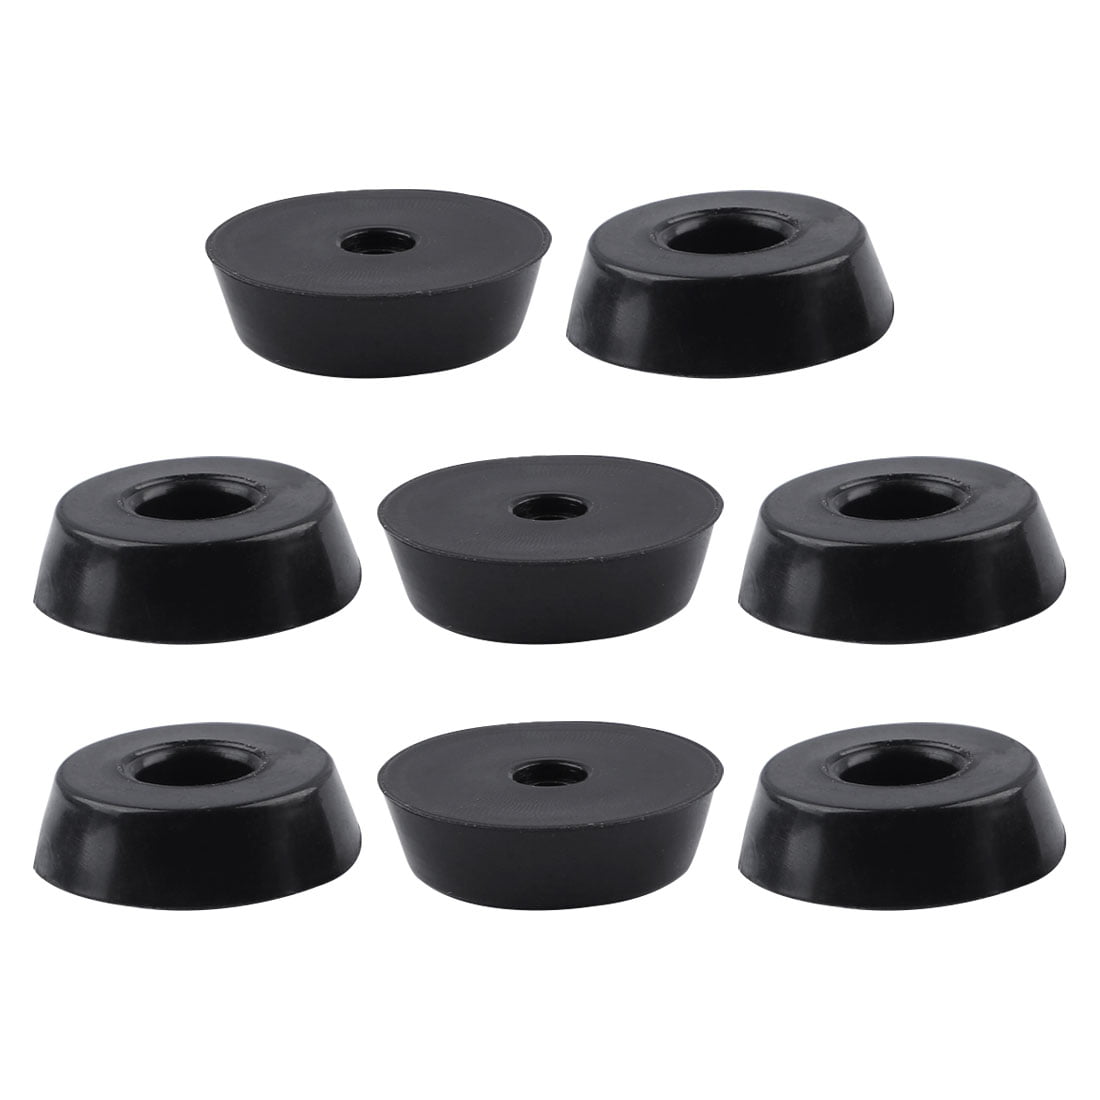 20 Rubber Feet Bumpers Floor Table Desk Furniture Buffer Pad Protection w/Screw 